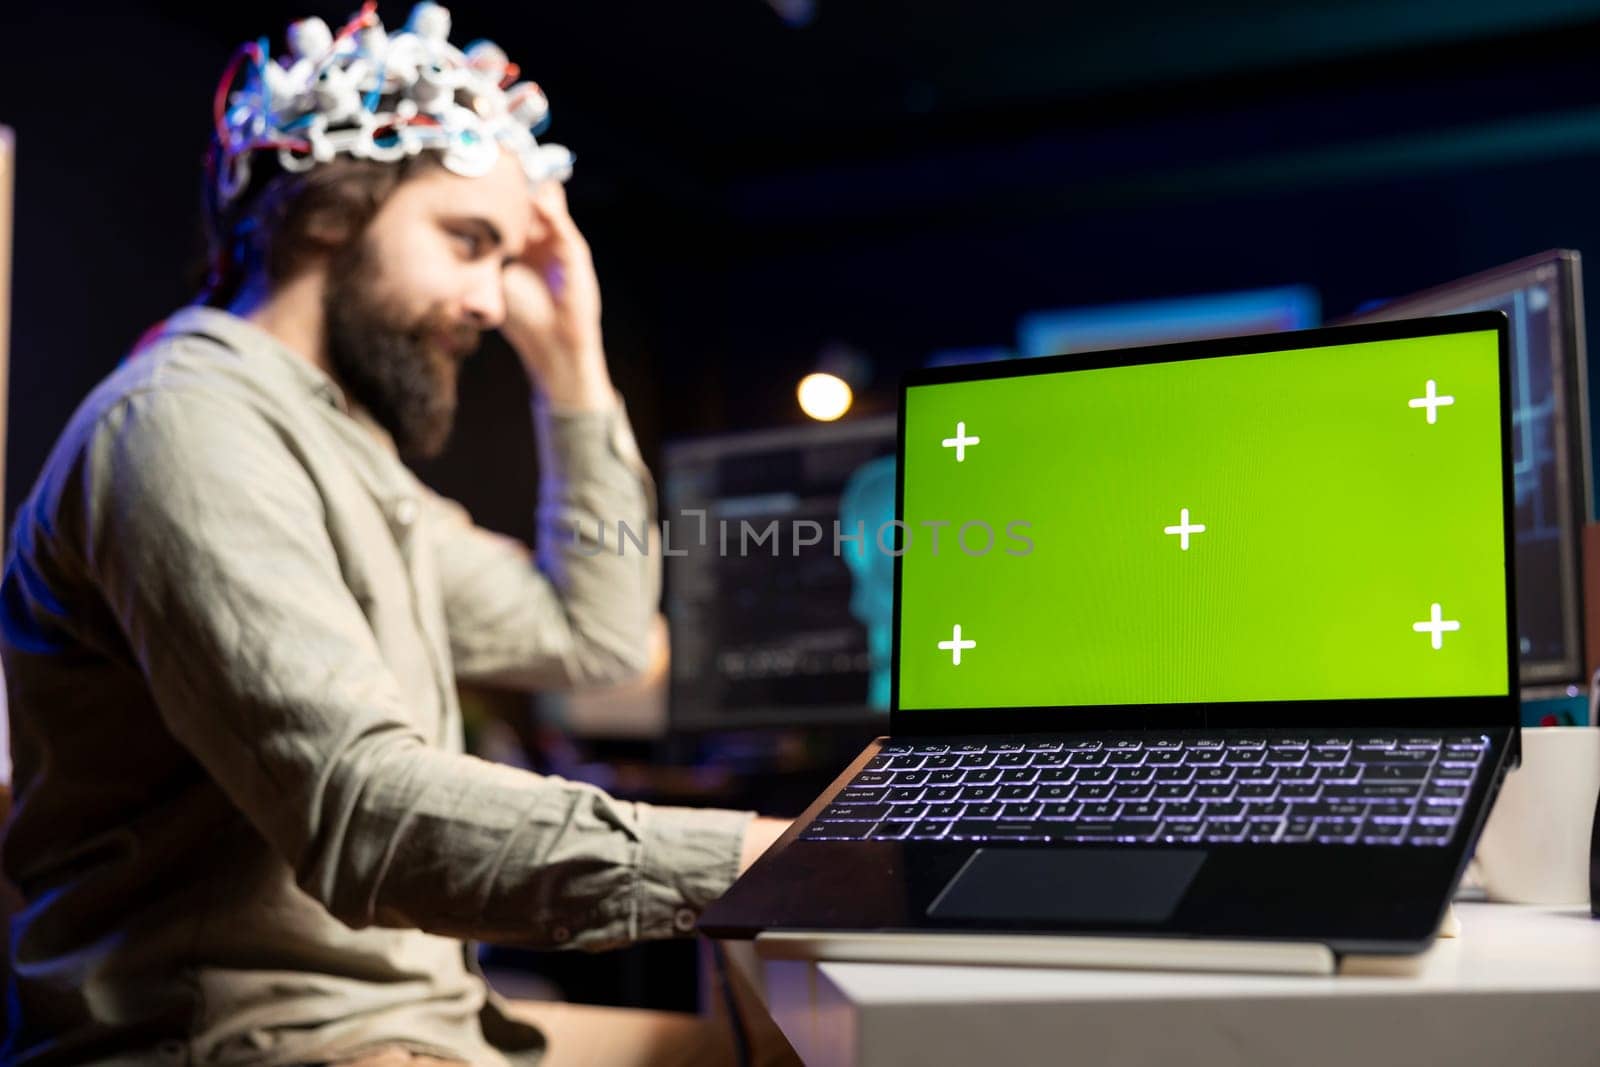 Man controlling computer functions using mind, helped by mockup notebook by DCStudio